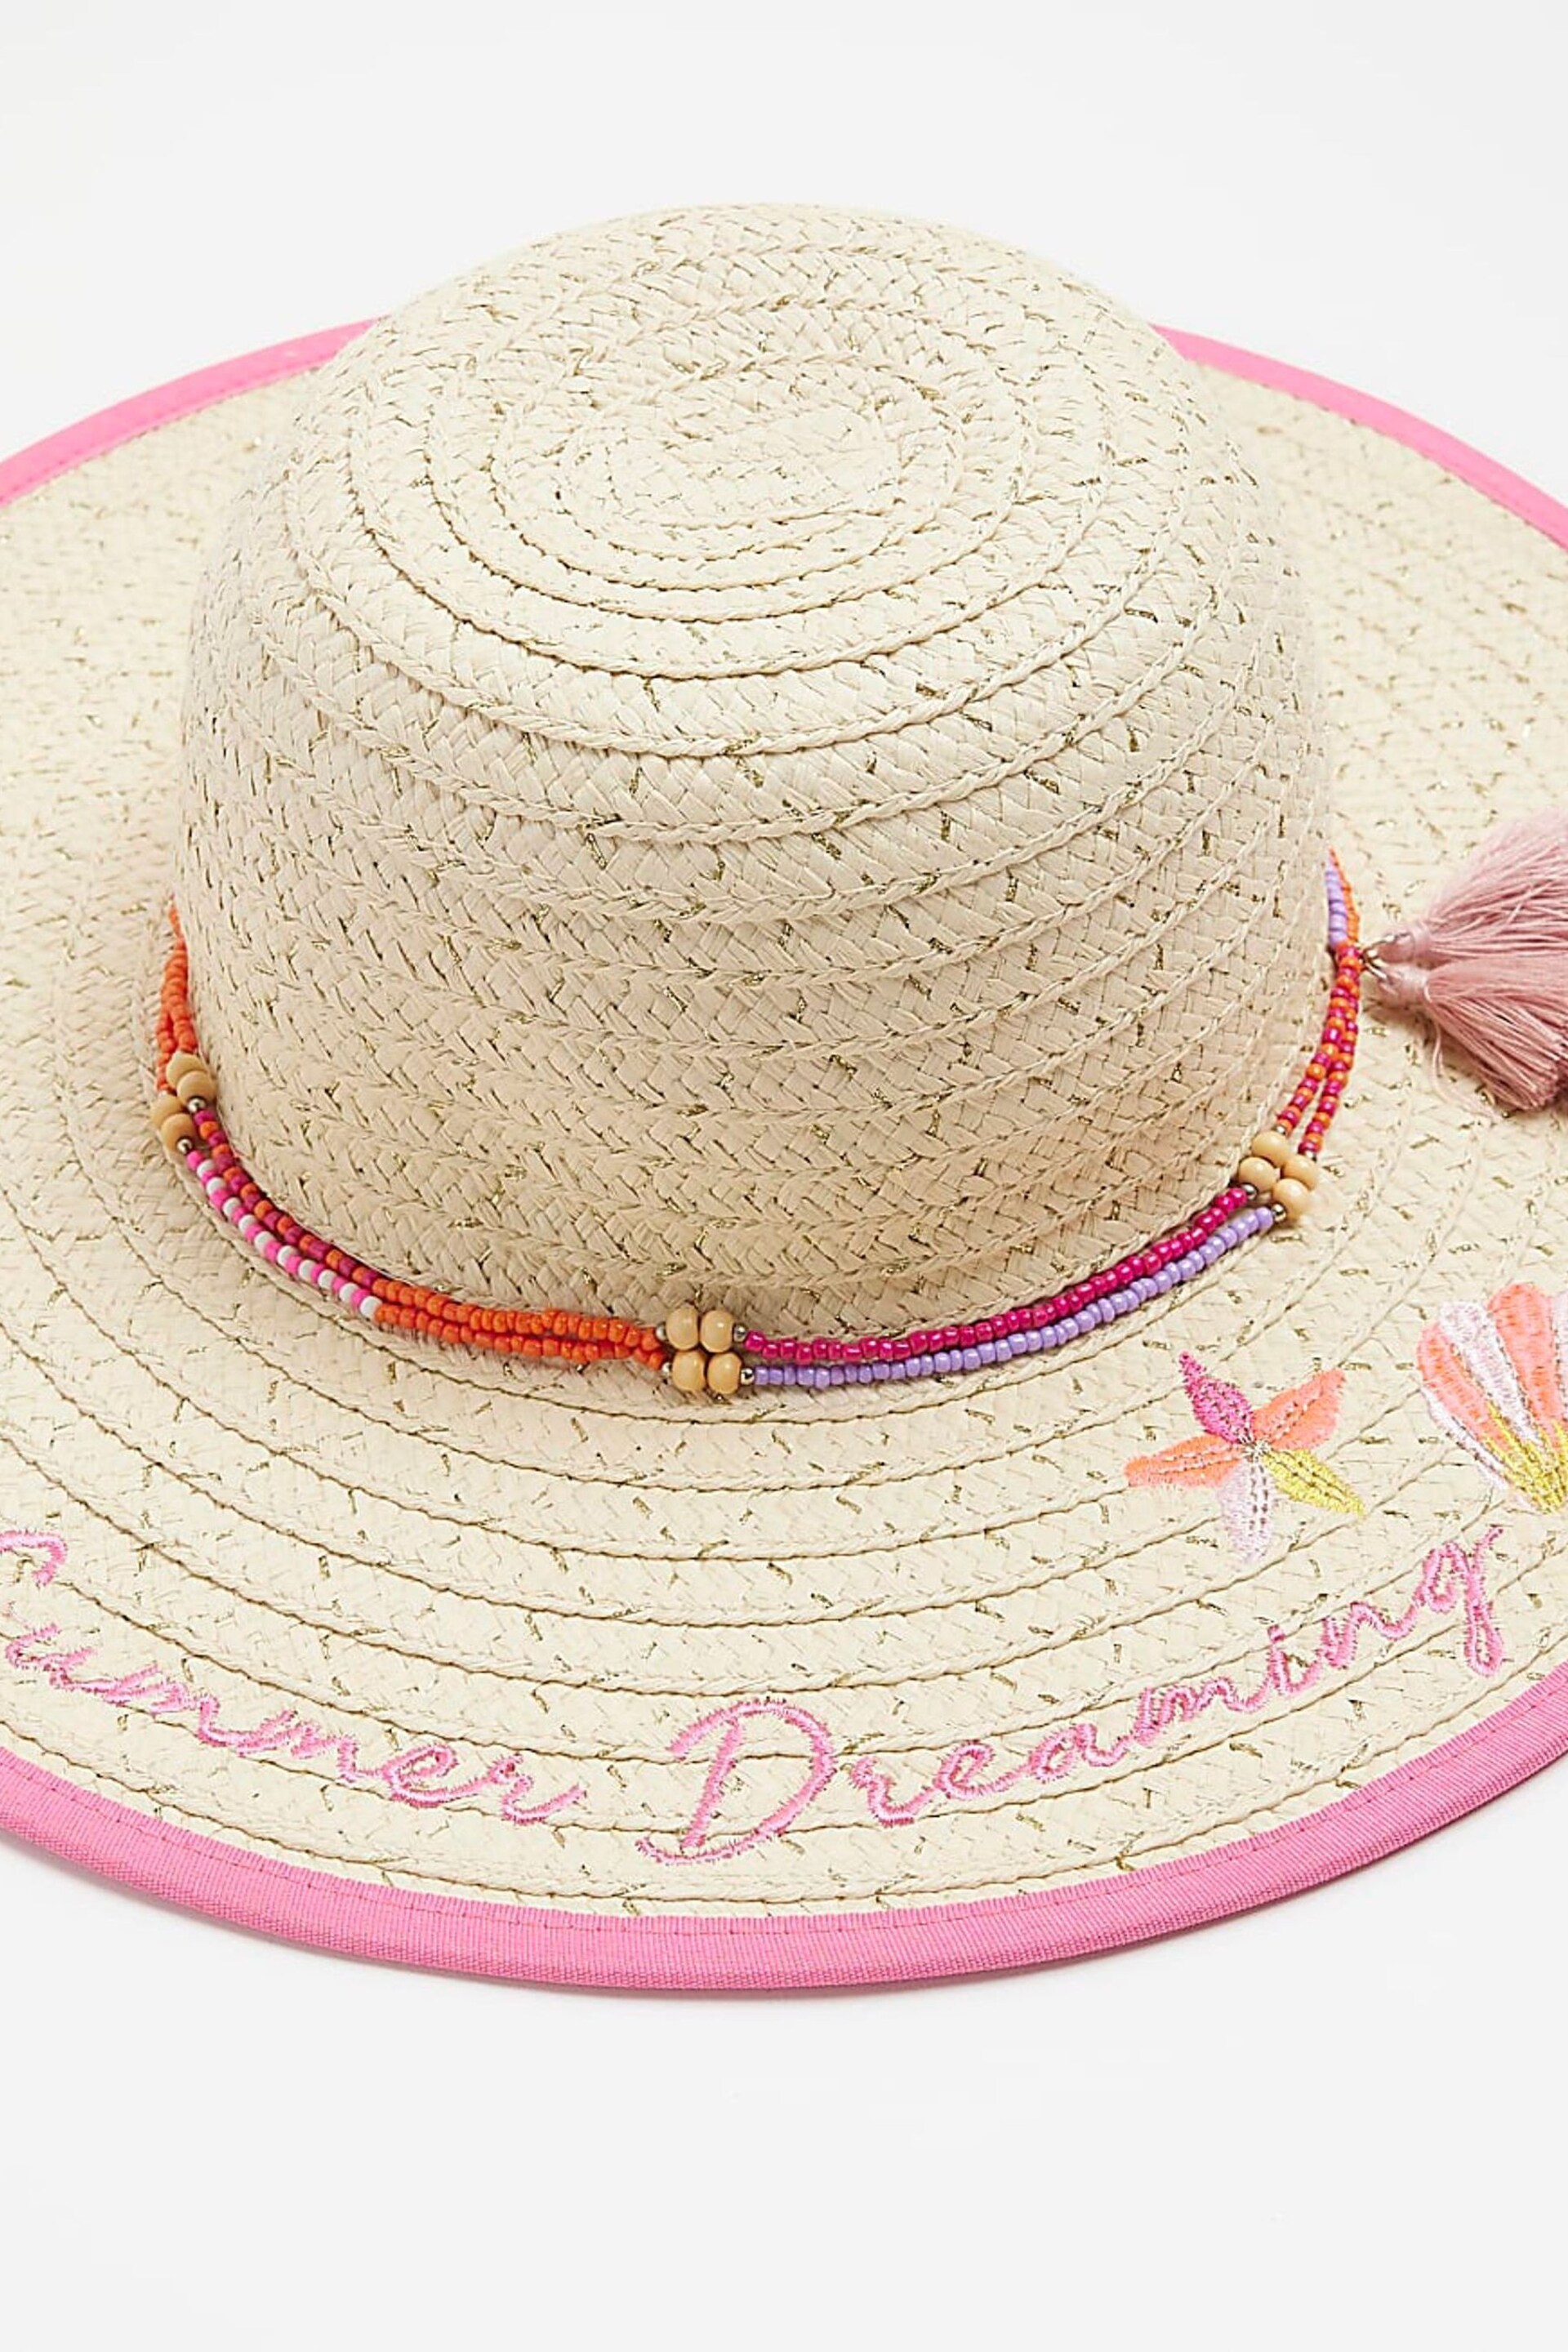 River Island Brown Girls Summer Dreaming Straw Hat - Image 2 of 2